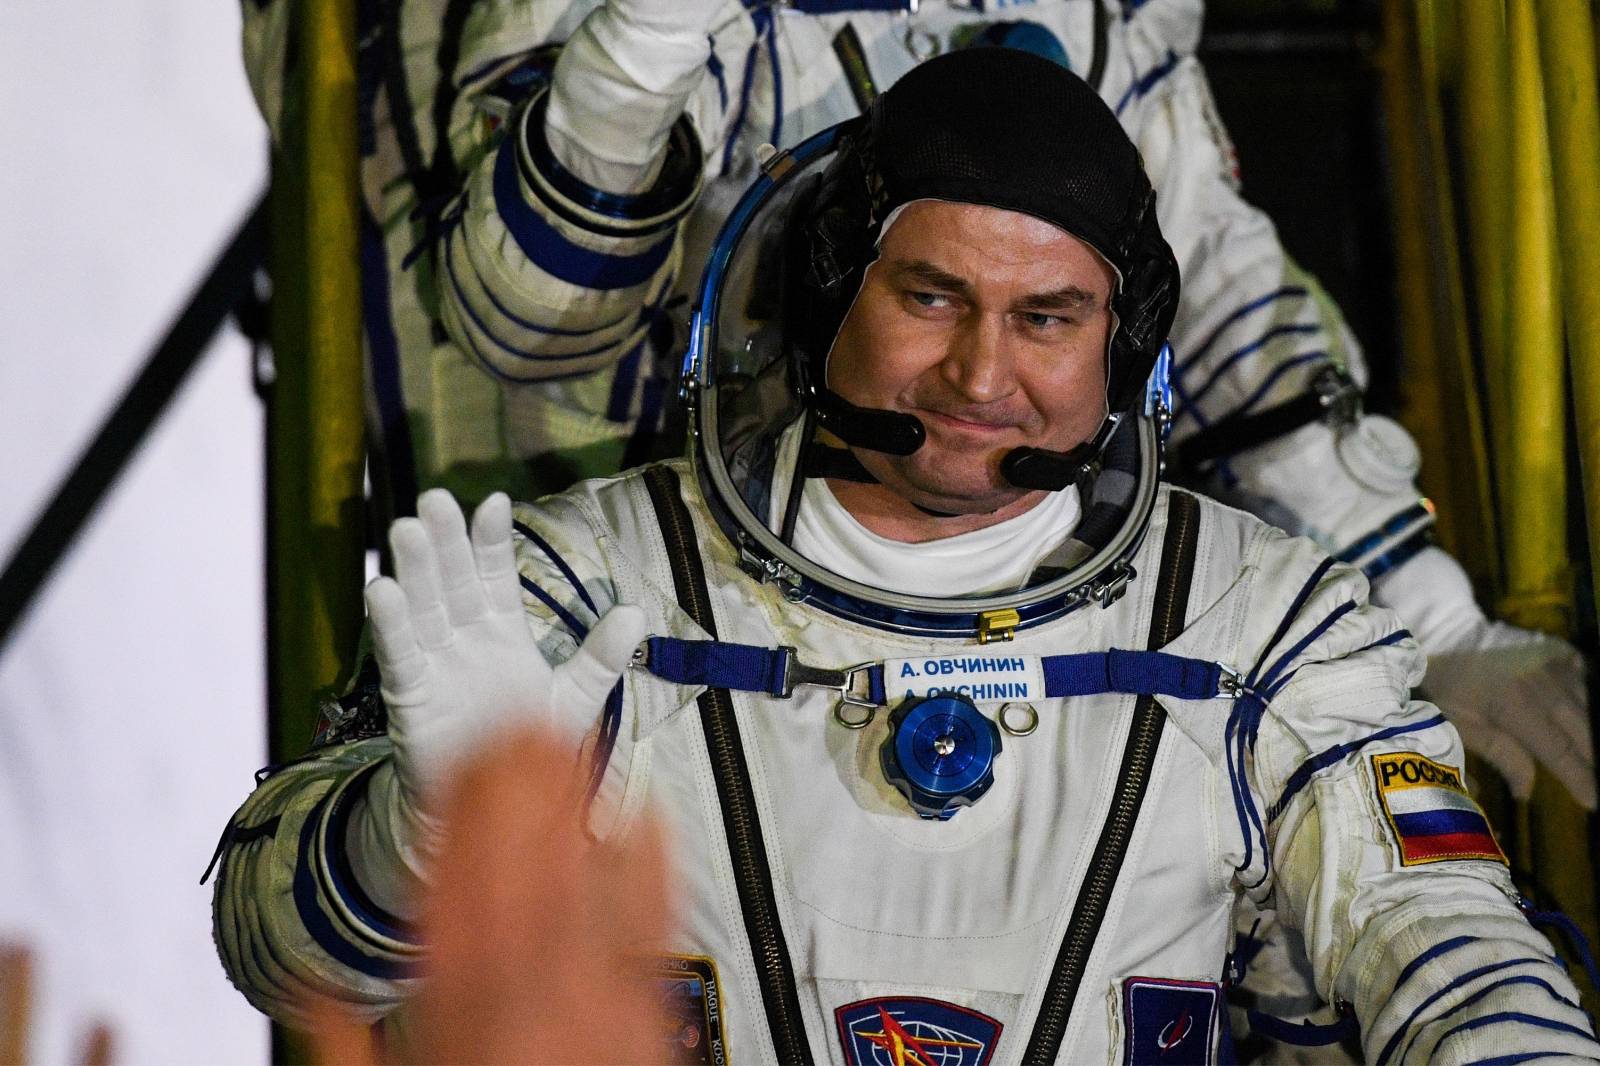 The International Space Station (ISS) crew members Aleksey Ovchinin of Russia boards the Soyuz MS-12 spacecraft for the launch at the Baikonur Cosmodrome